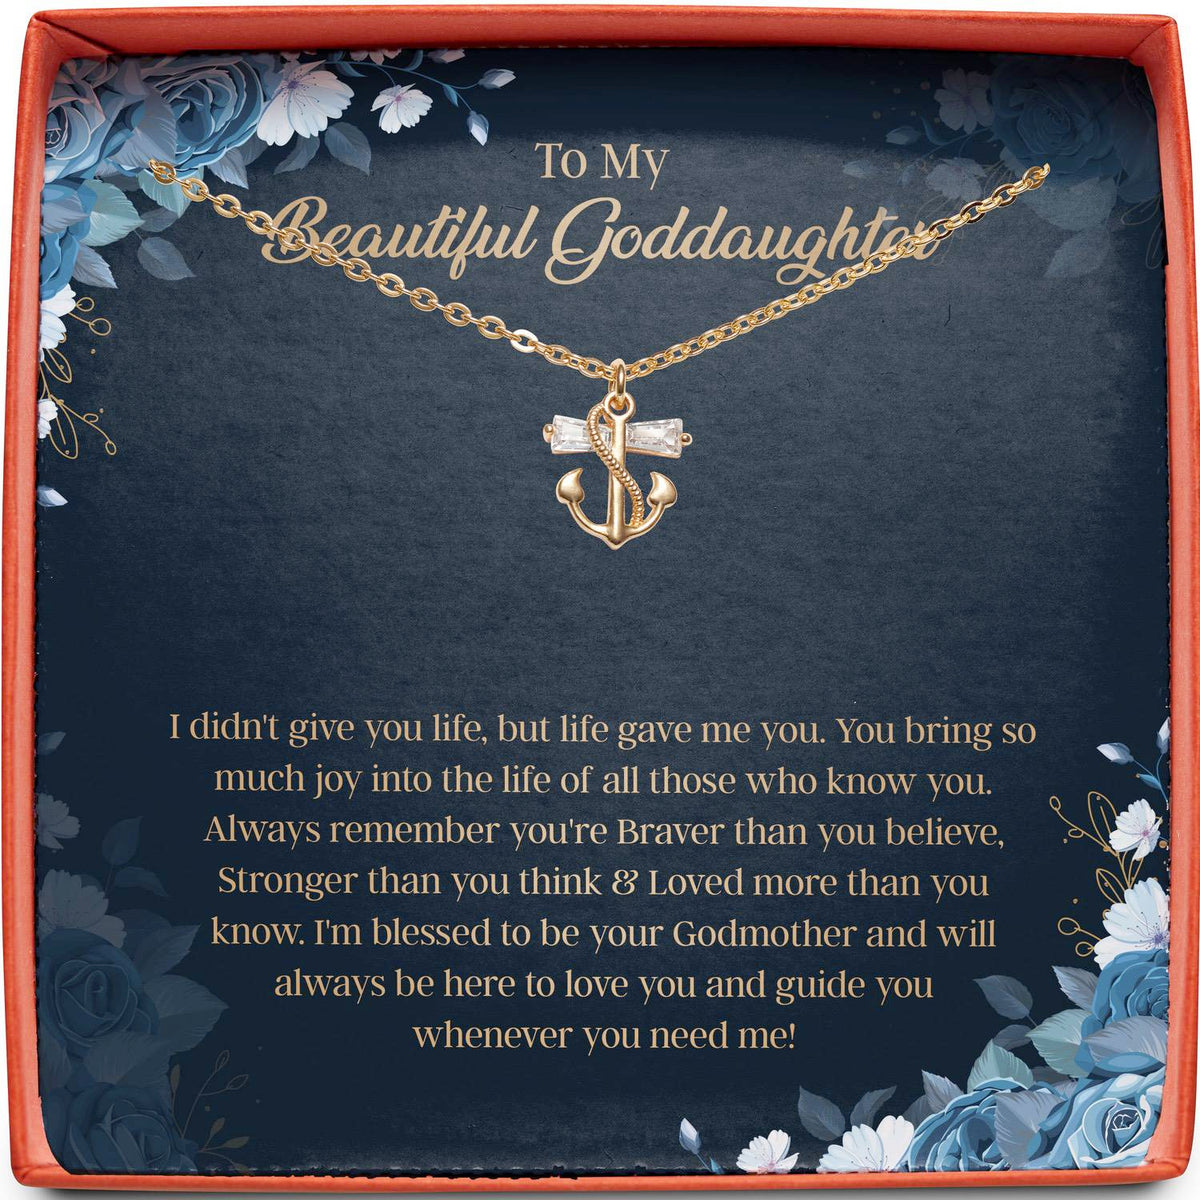 To My Beautiful Goddaughter | Braver, Stronger, Loved | Anchor Necklace